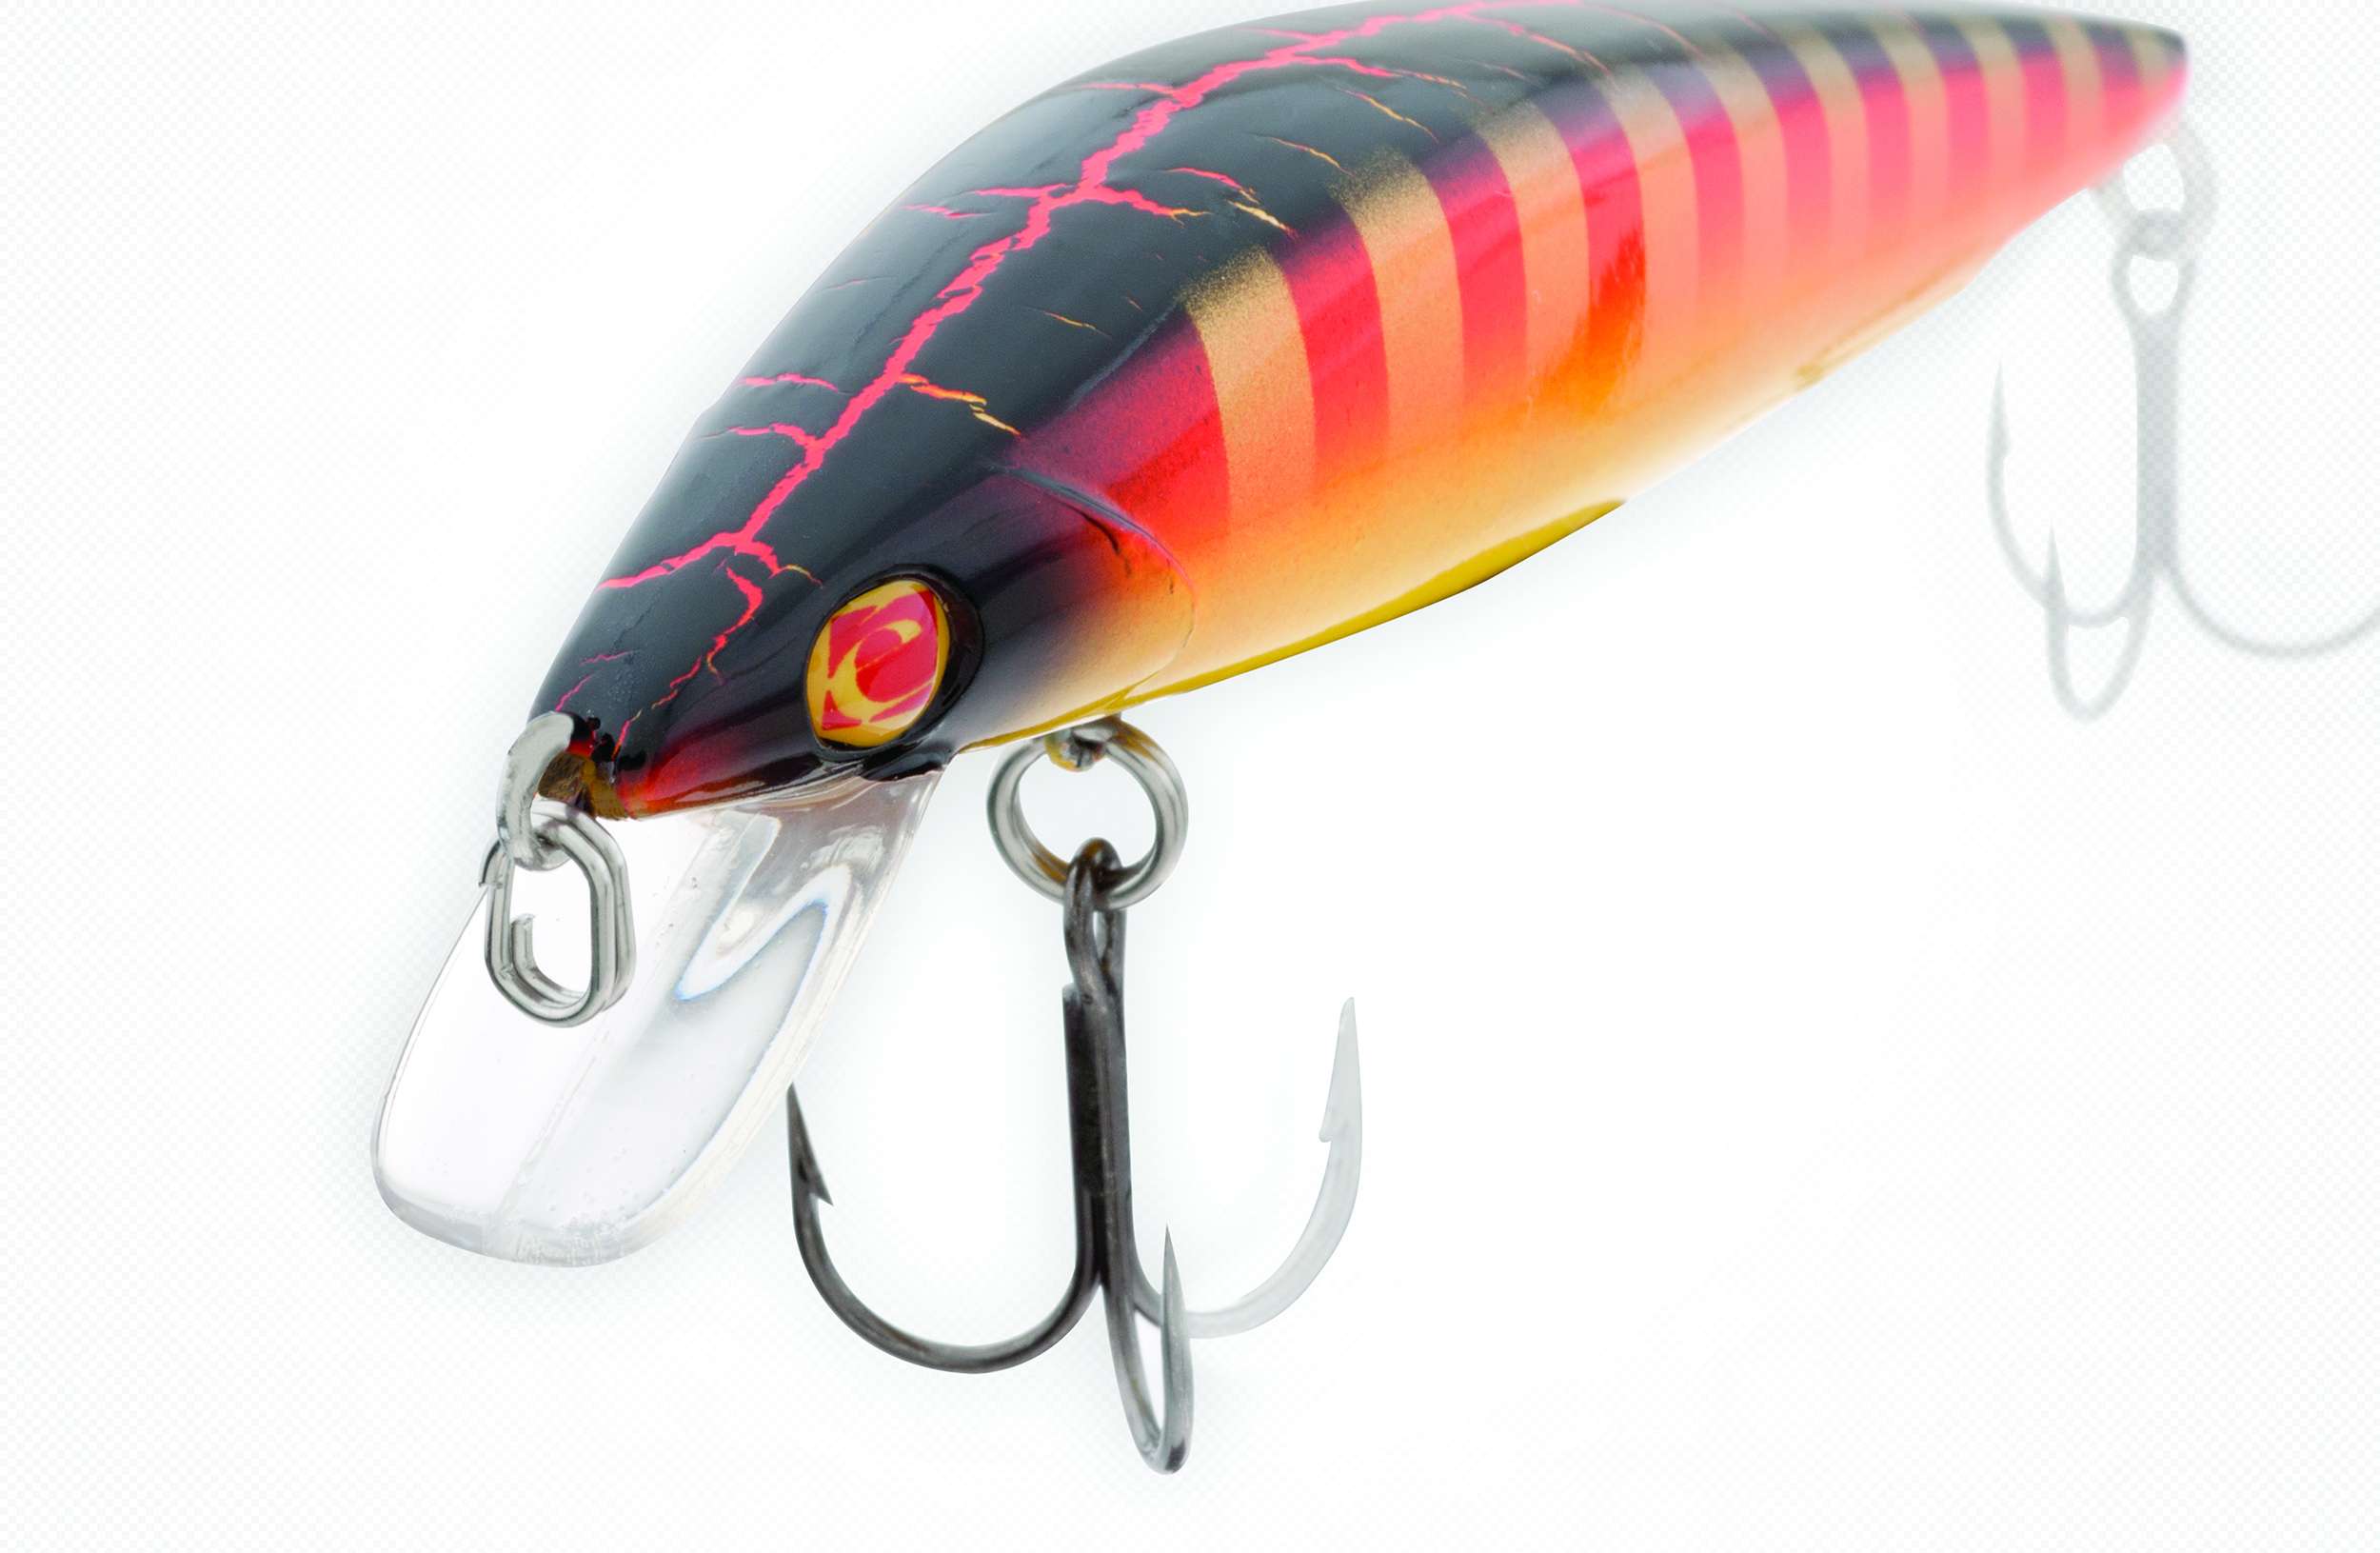 Here's another stocking stuffer, Sebile's Bull Minnow. It's from the Action First line of hardbaits that are valued priced but loaded with features like premium hooks, finishes and action.